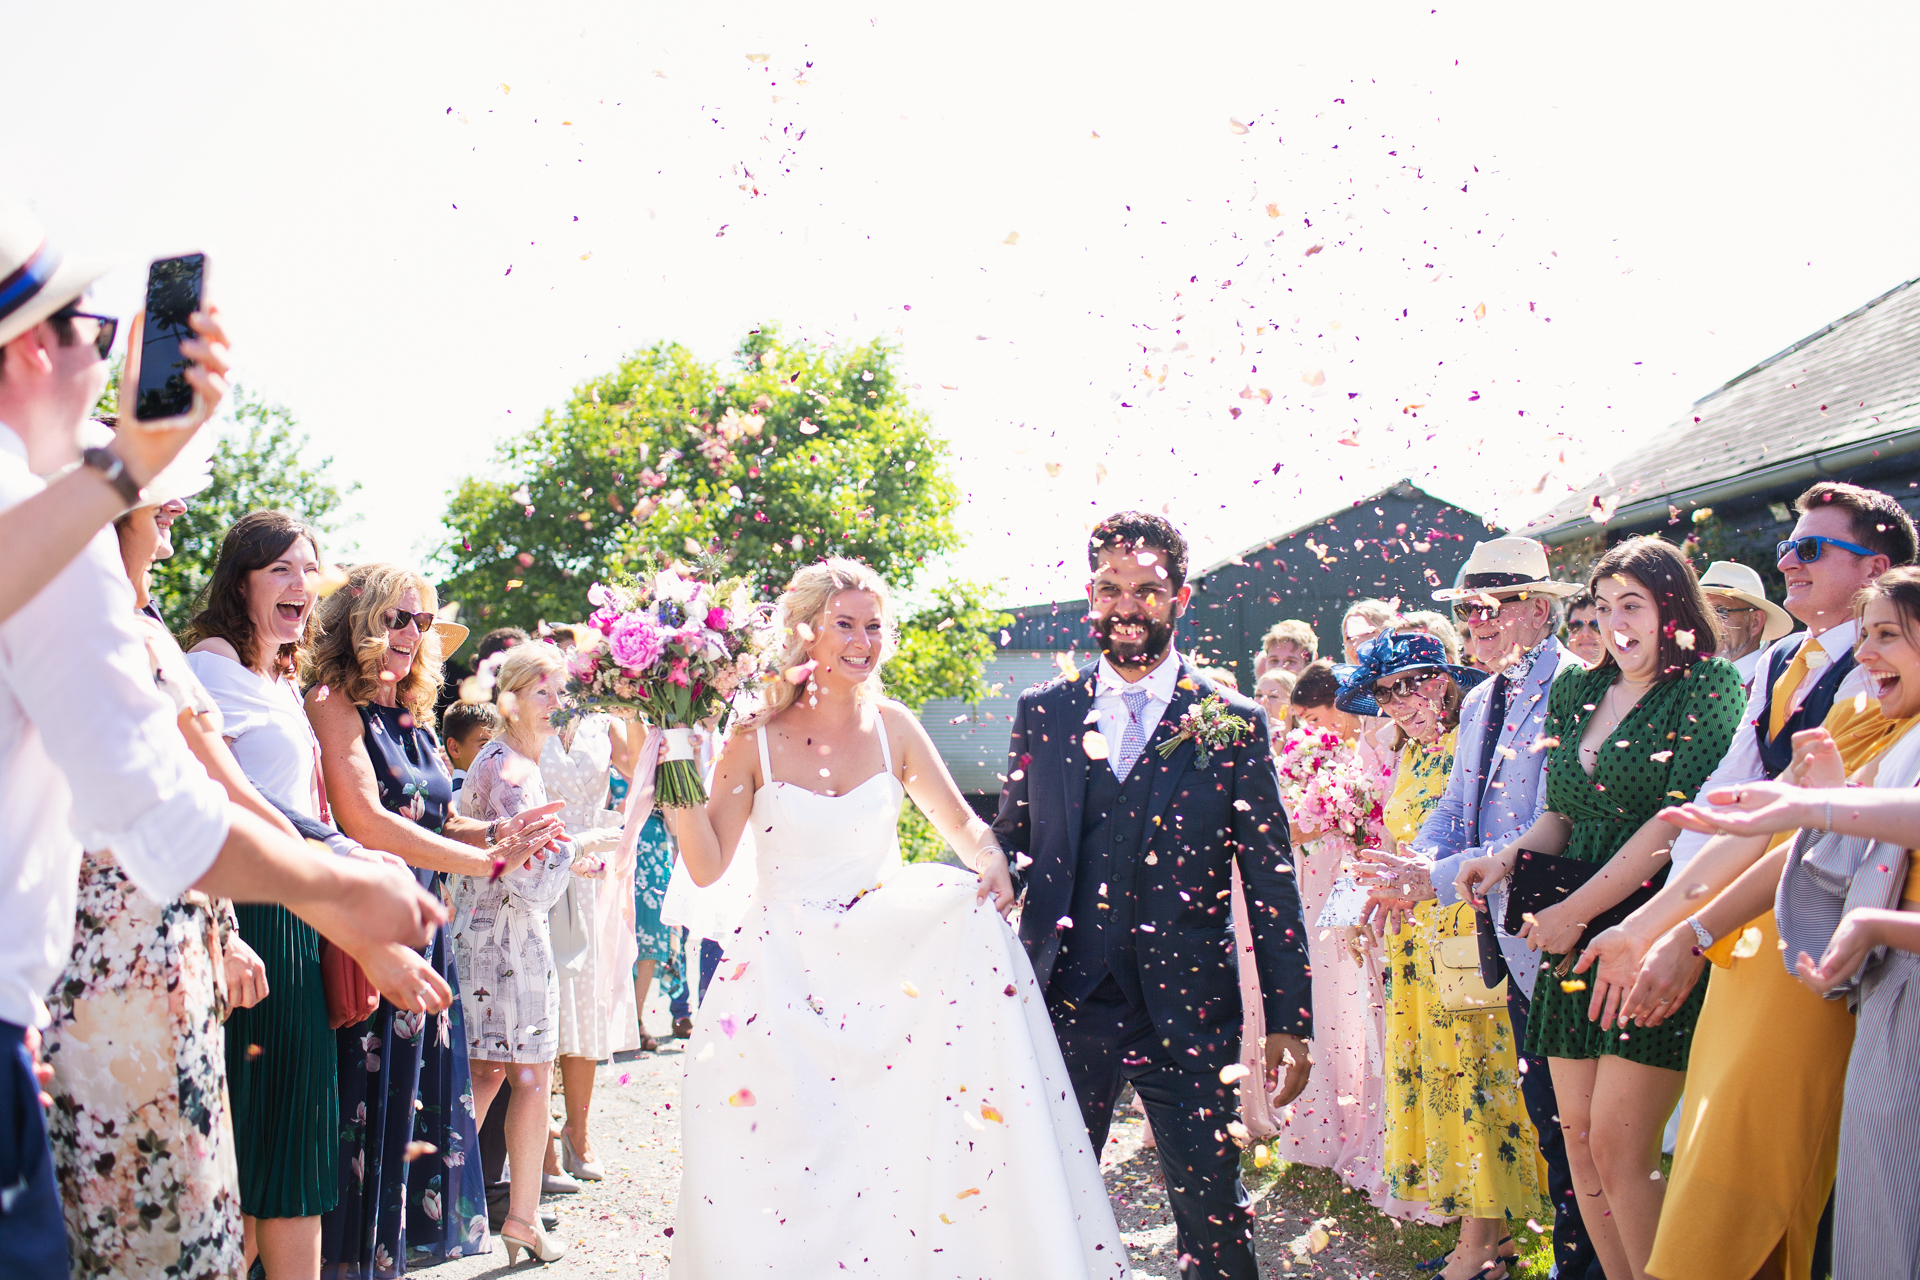 Bride and groom get married at Upwaltham Barns in Chichester